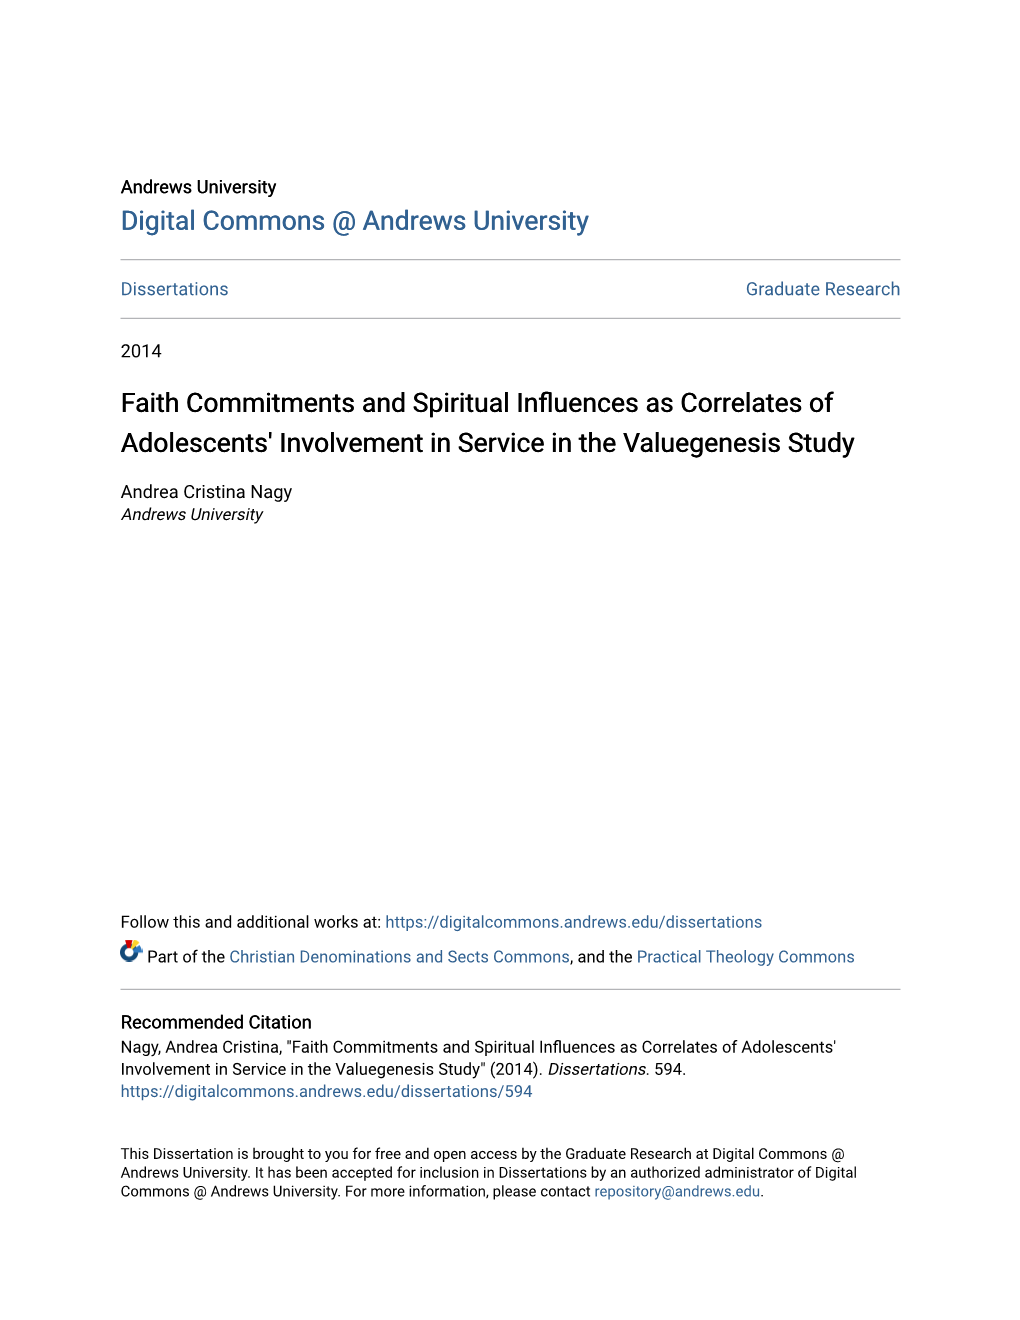 Faith Commitments and Spiritual Influences As Correlates of Adolescents' Involvement in Service in the Valuegenesis Study